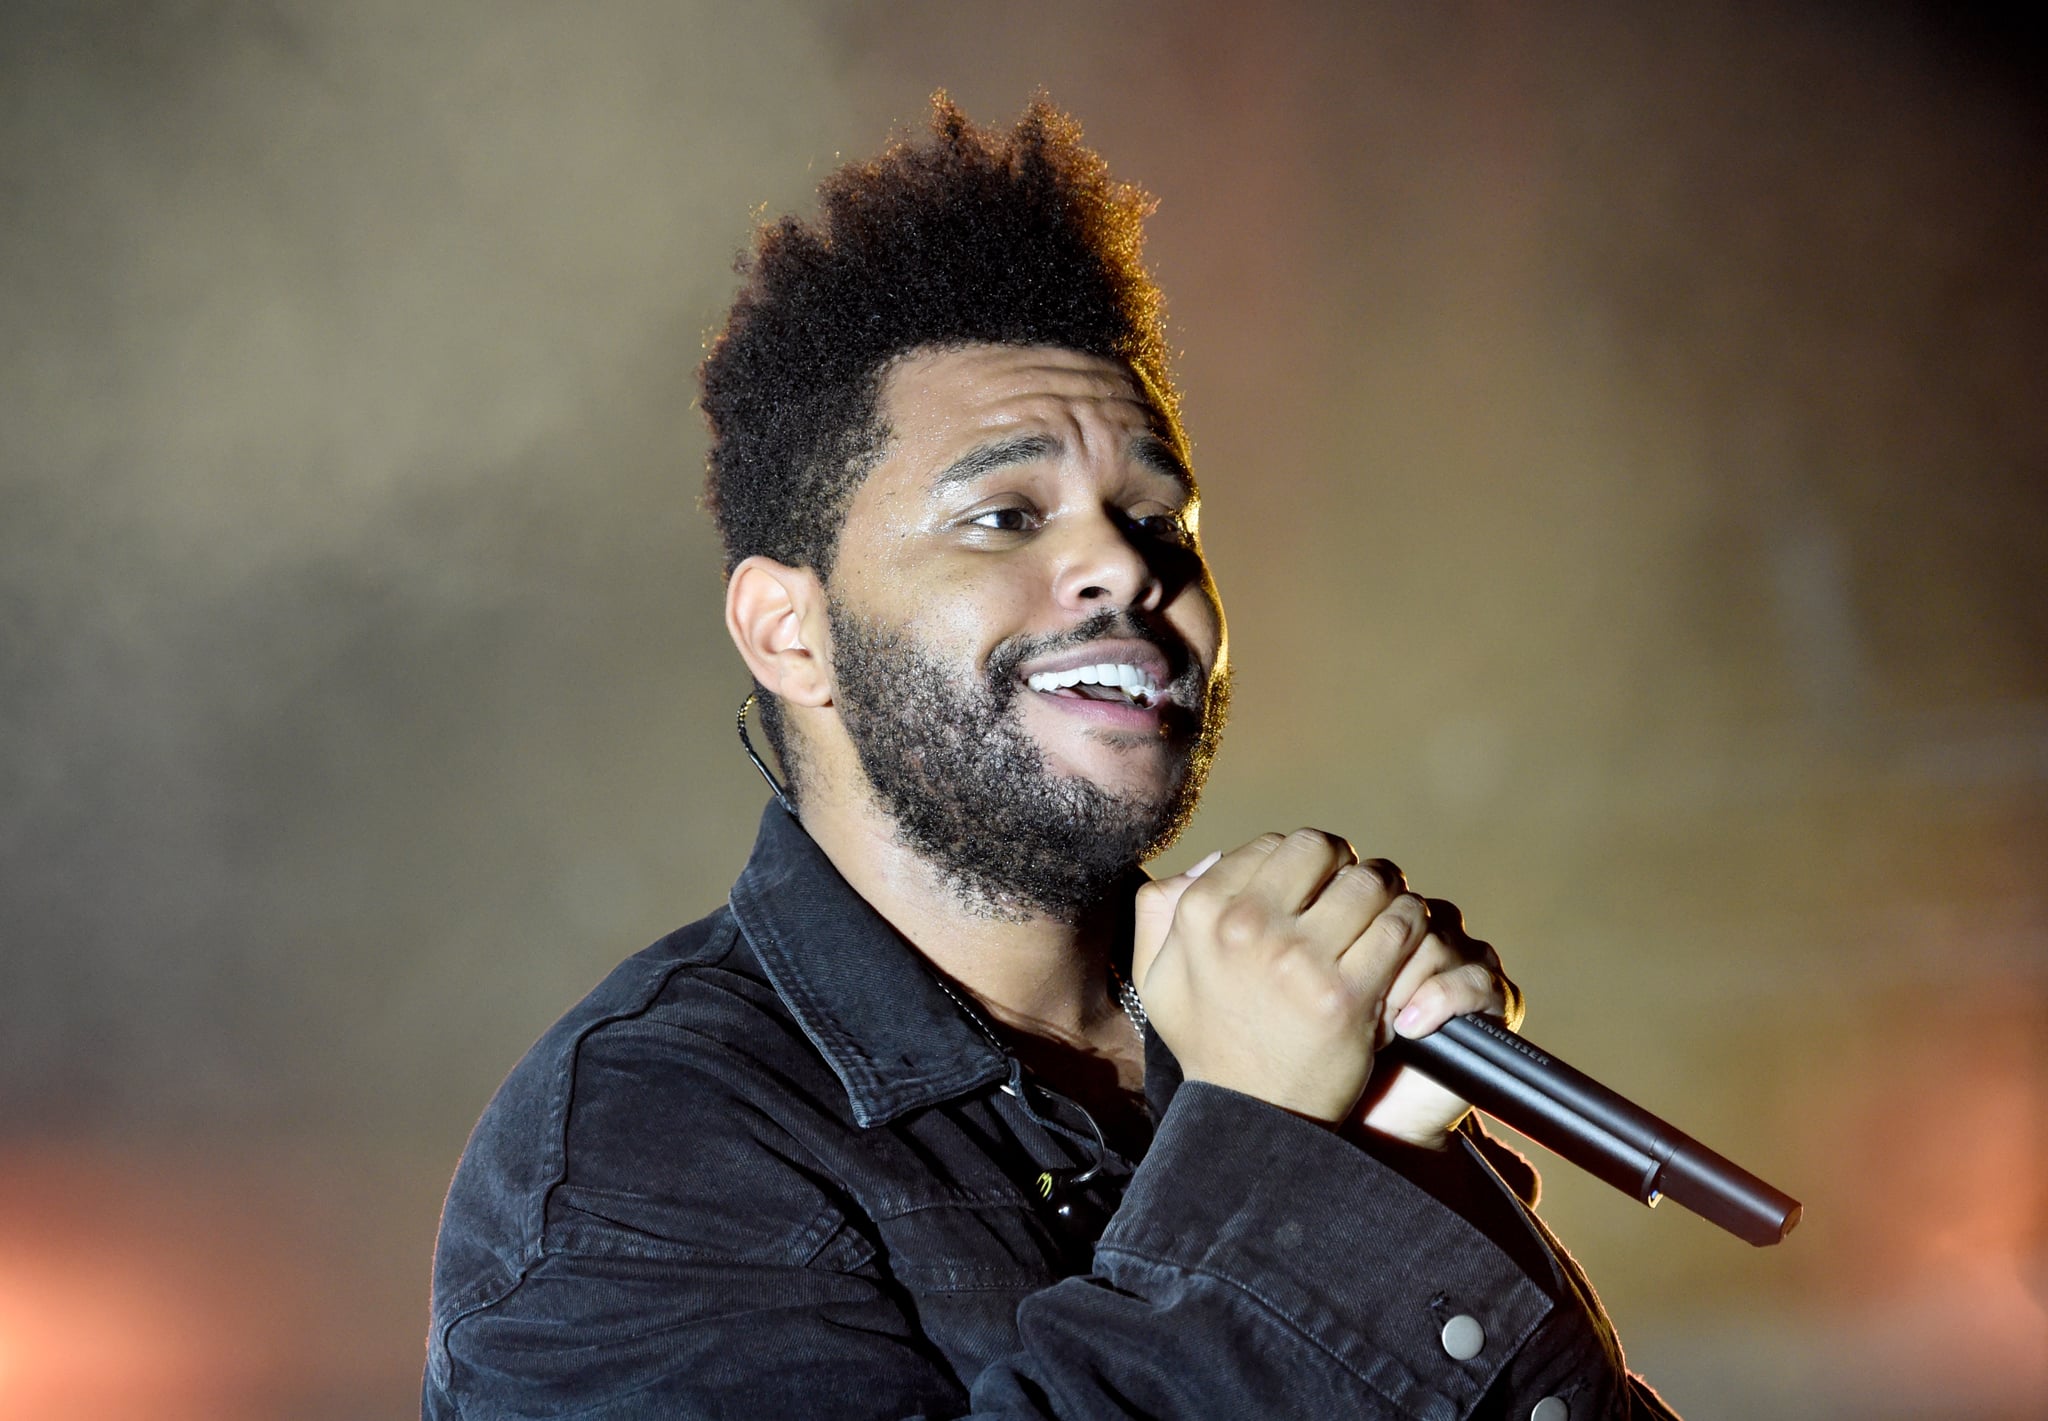 NEW YORK, NY - SEPTEMBER 29:  The Weeknd performs onstage during the 2018 Global Citizen Festival: Be The Generation in Central Park on September 29, 2018 in New York City.  (Photo by Kevin Mazur/Getty Images for Global Citizen)